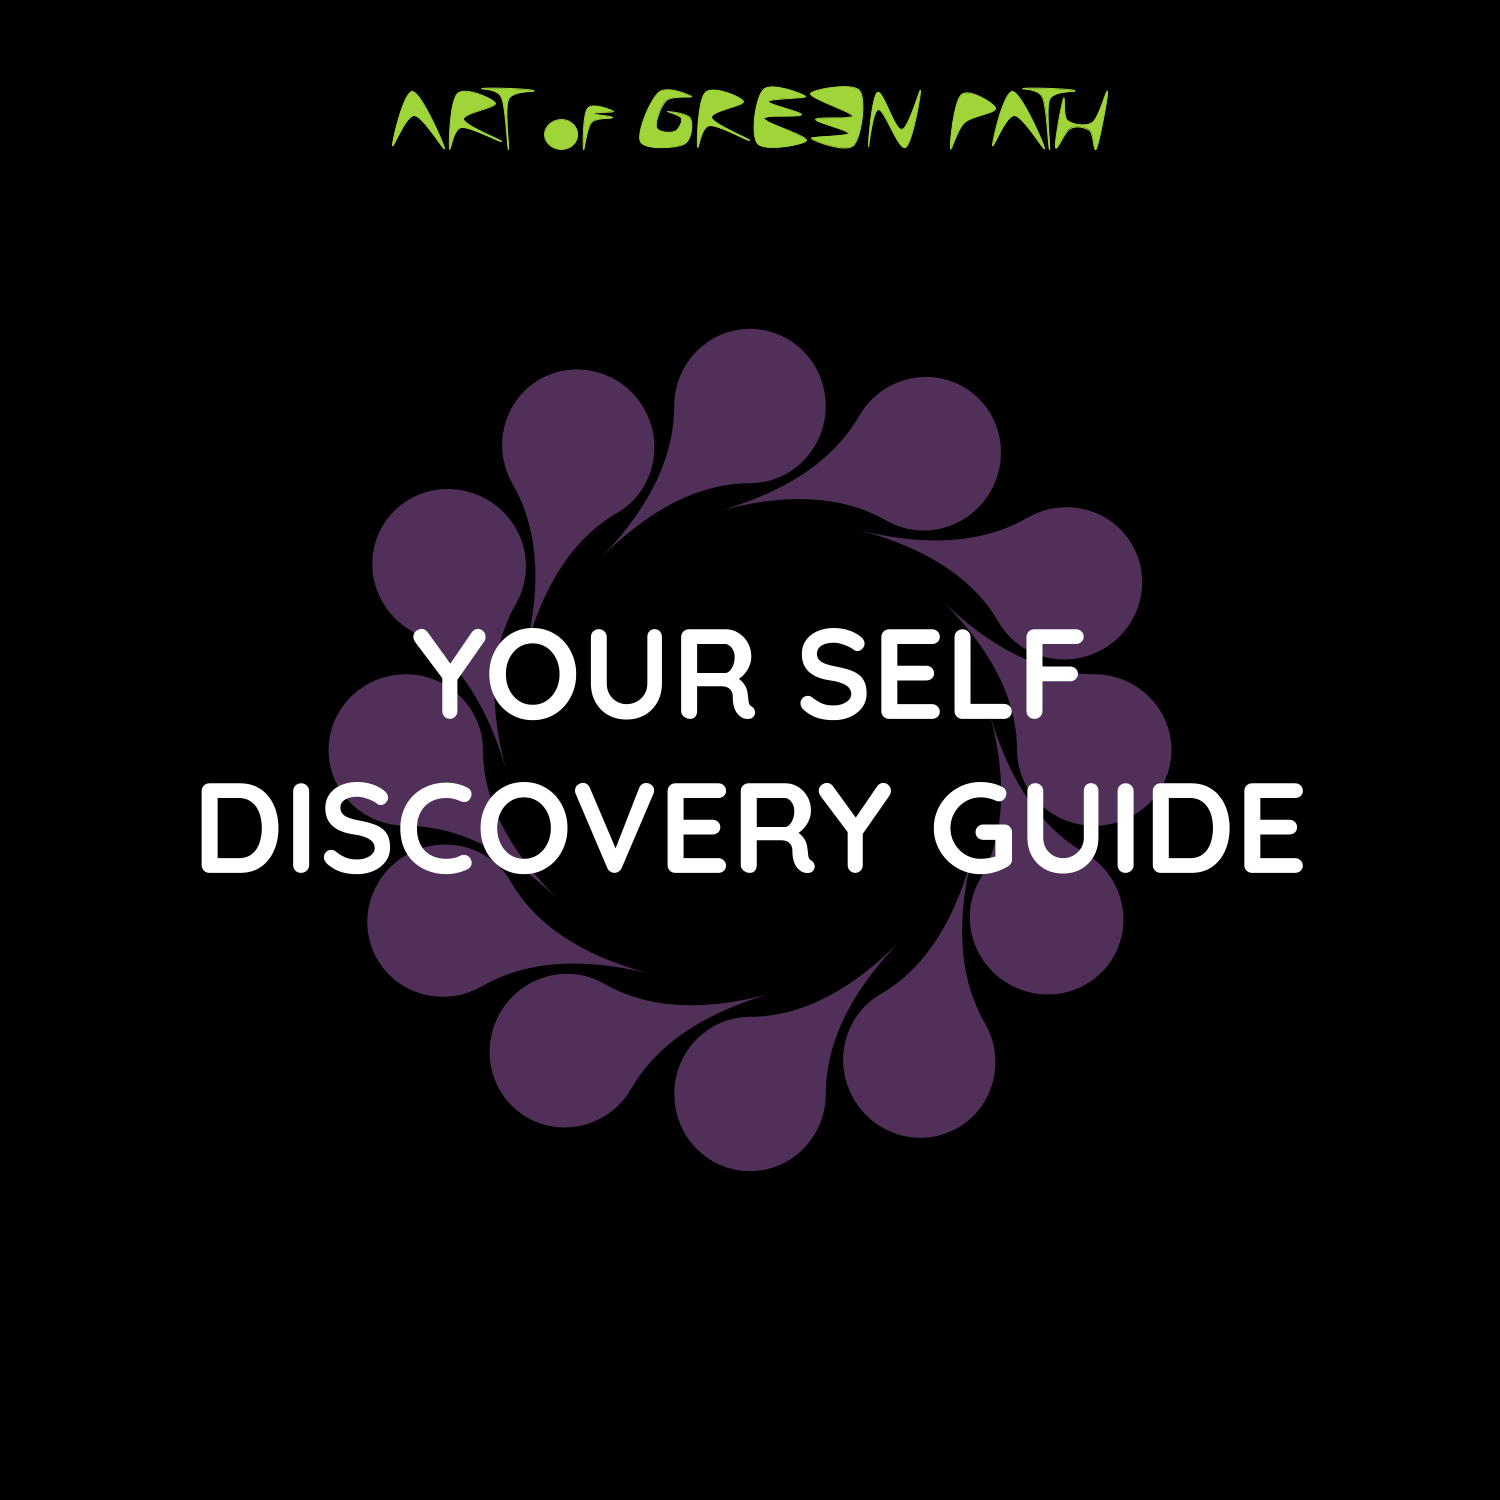 YOUR SELF DISCOVERY GUIDE by Art Of Green Path